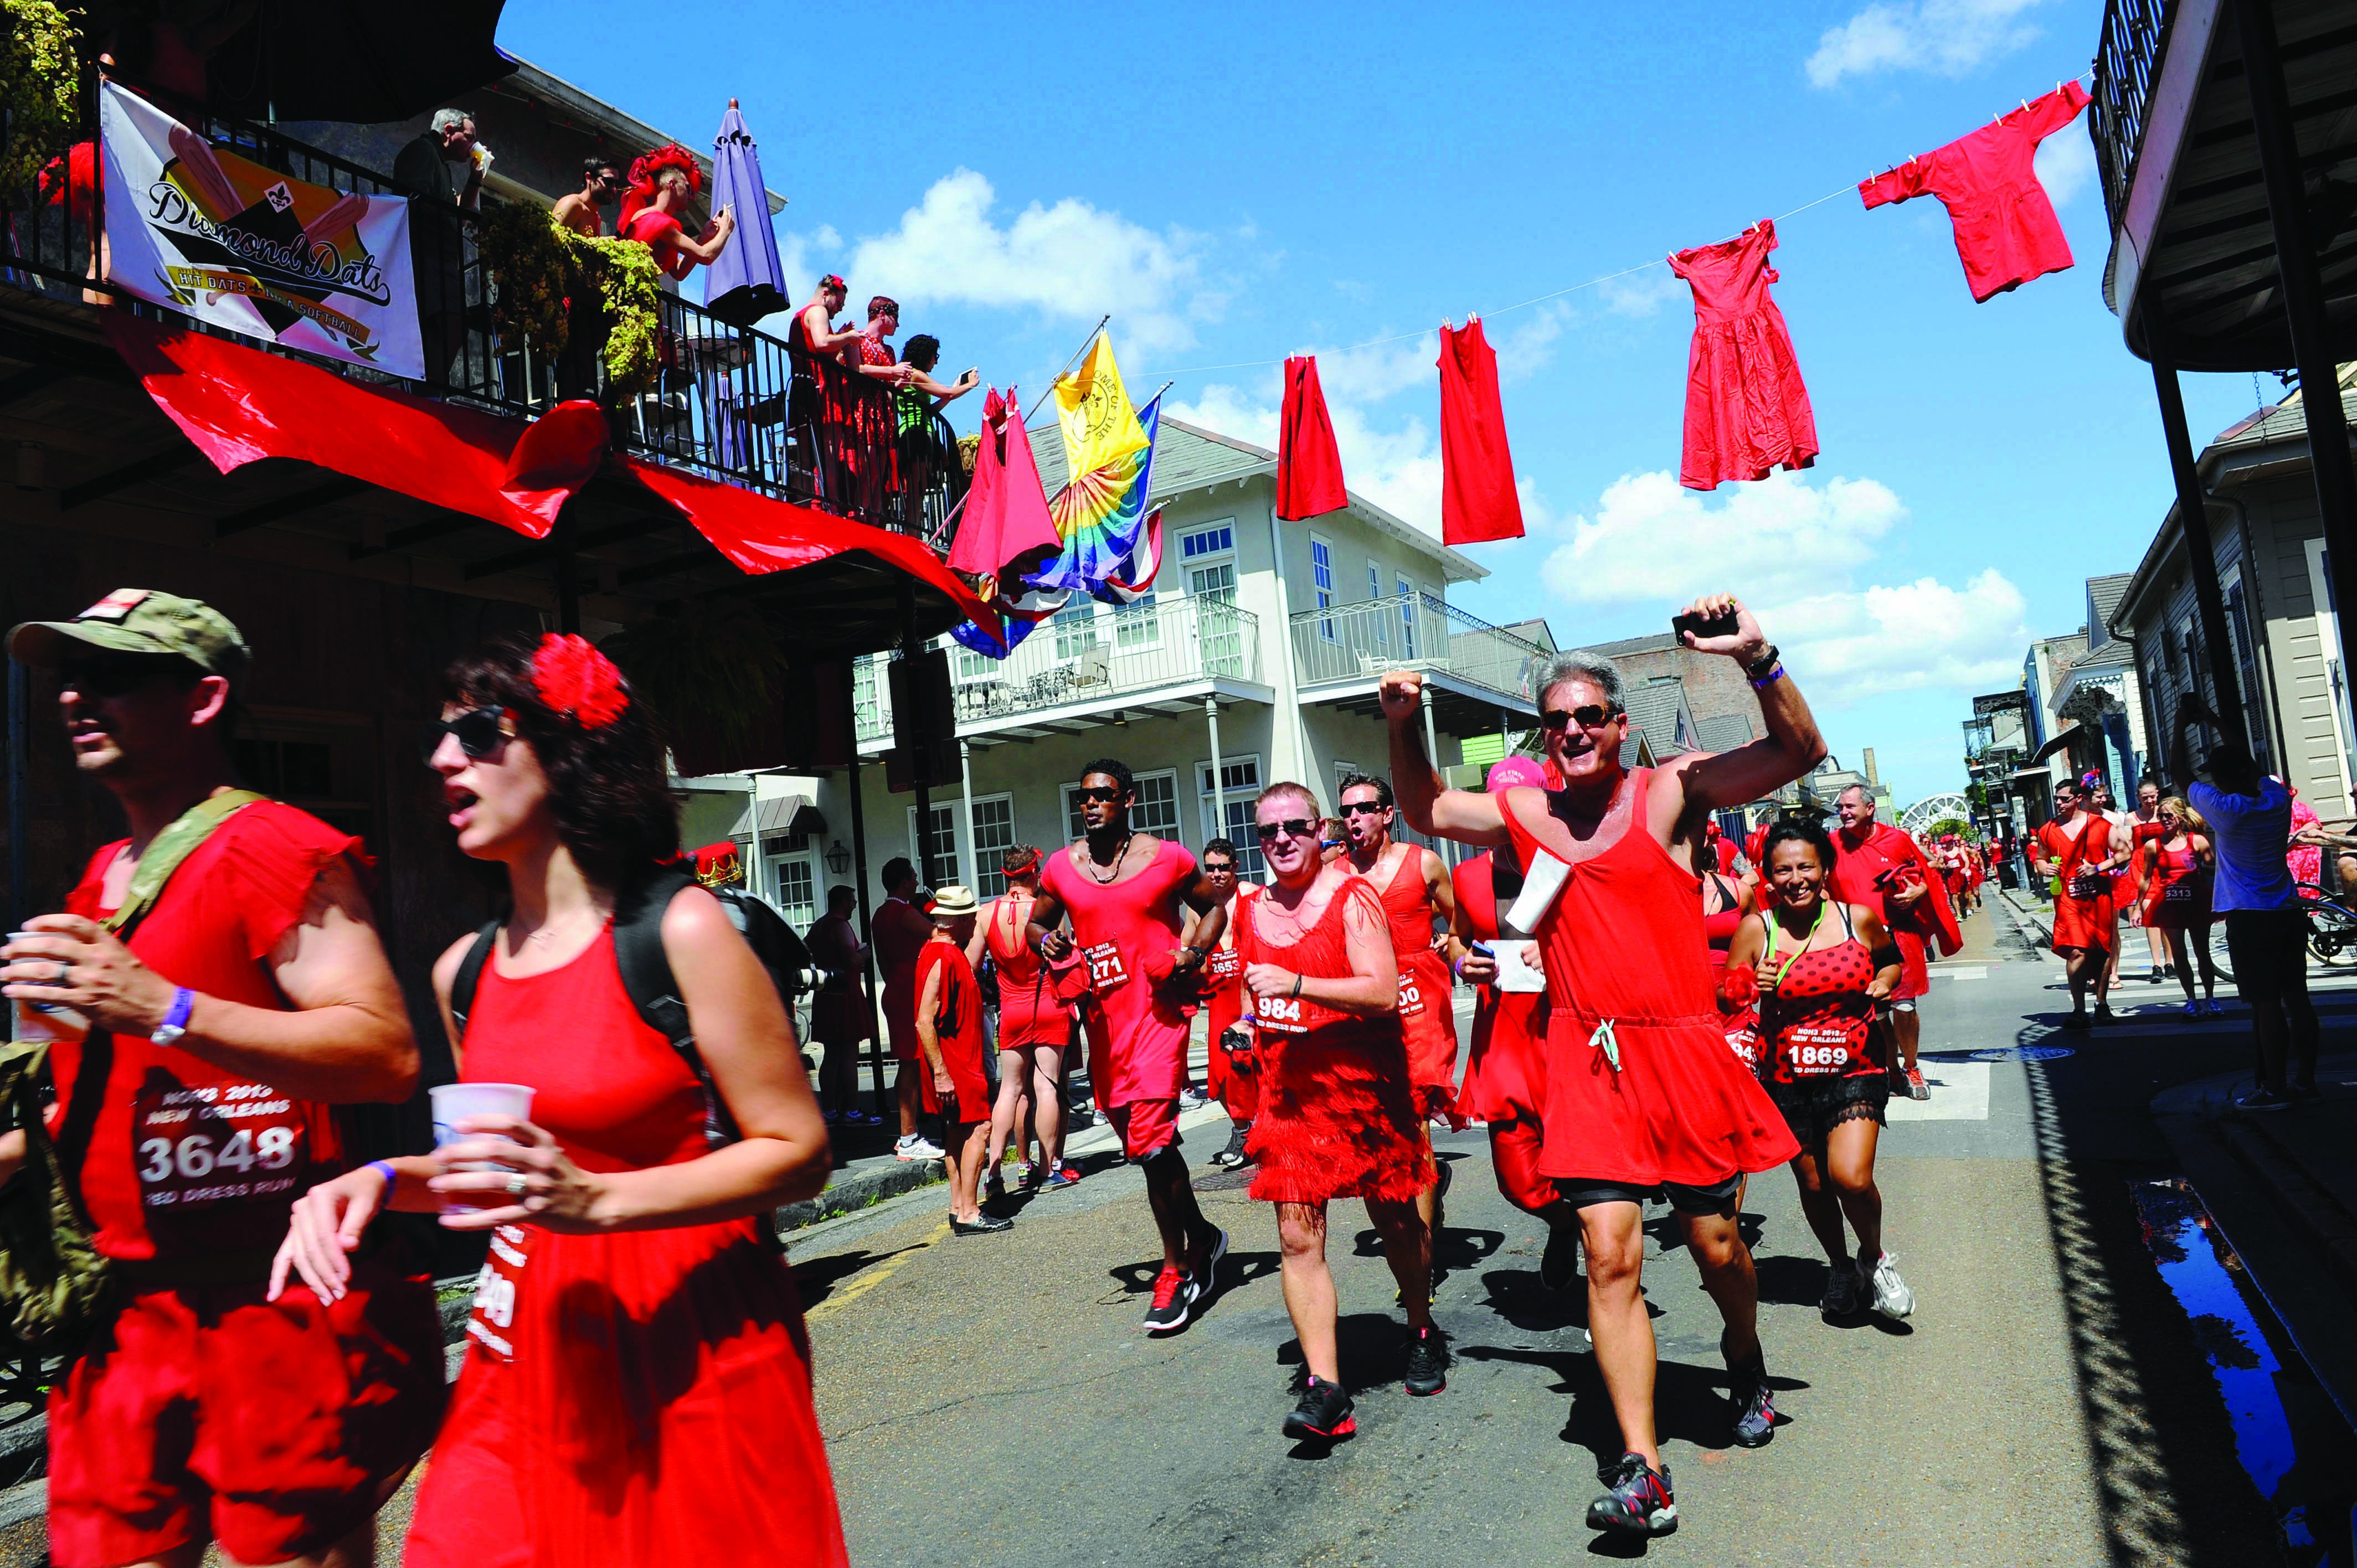 Red run, red run: Red Dress Run hits the streets for 2016 | New ...